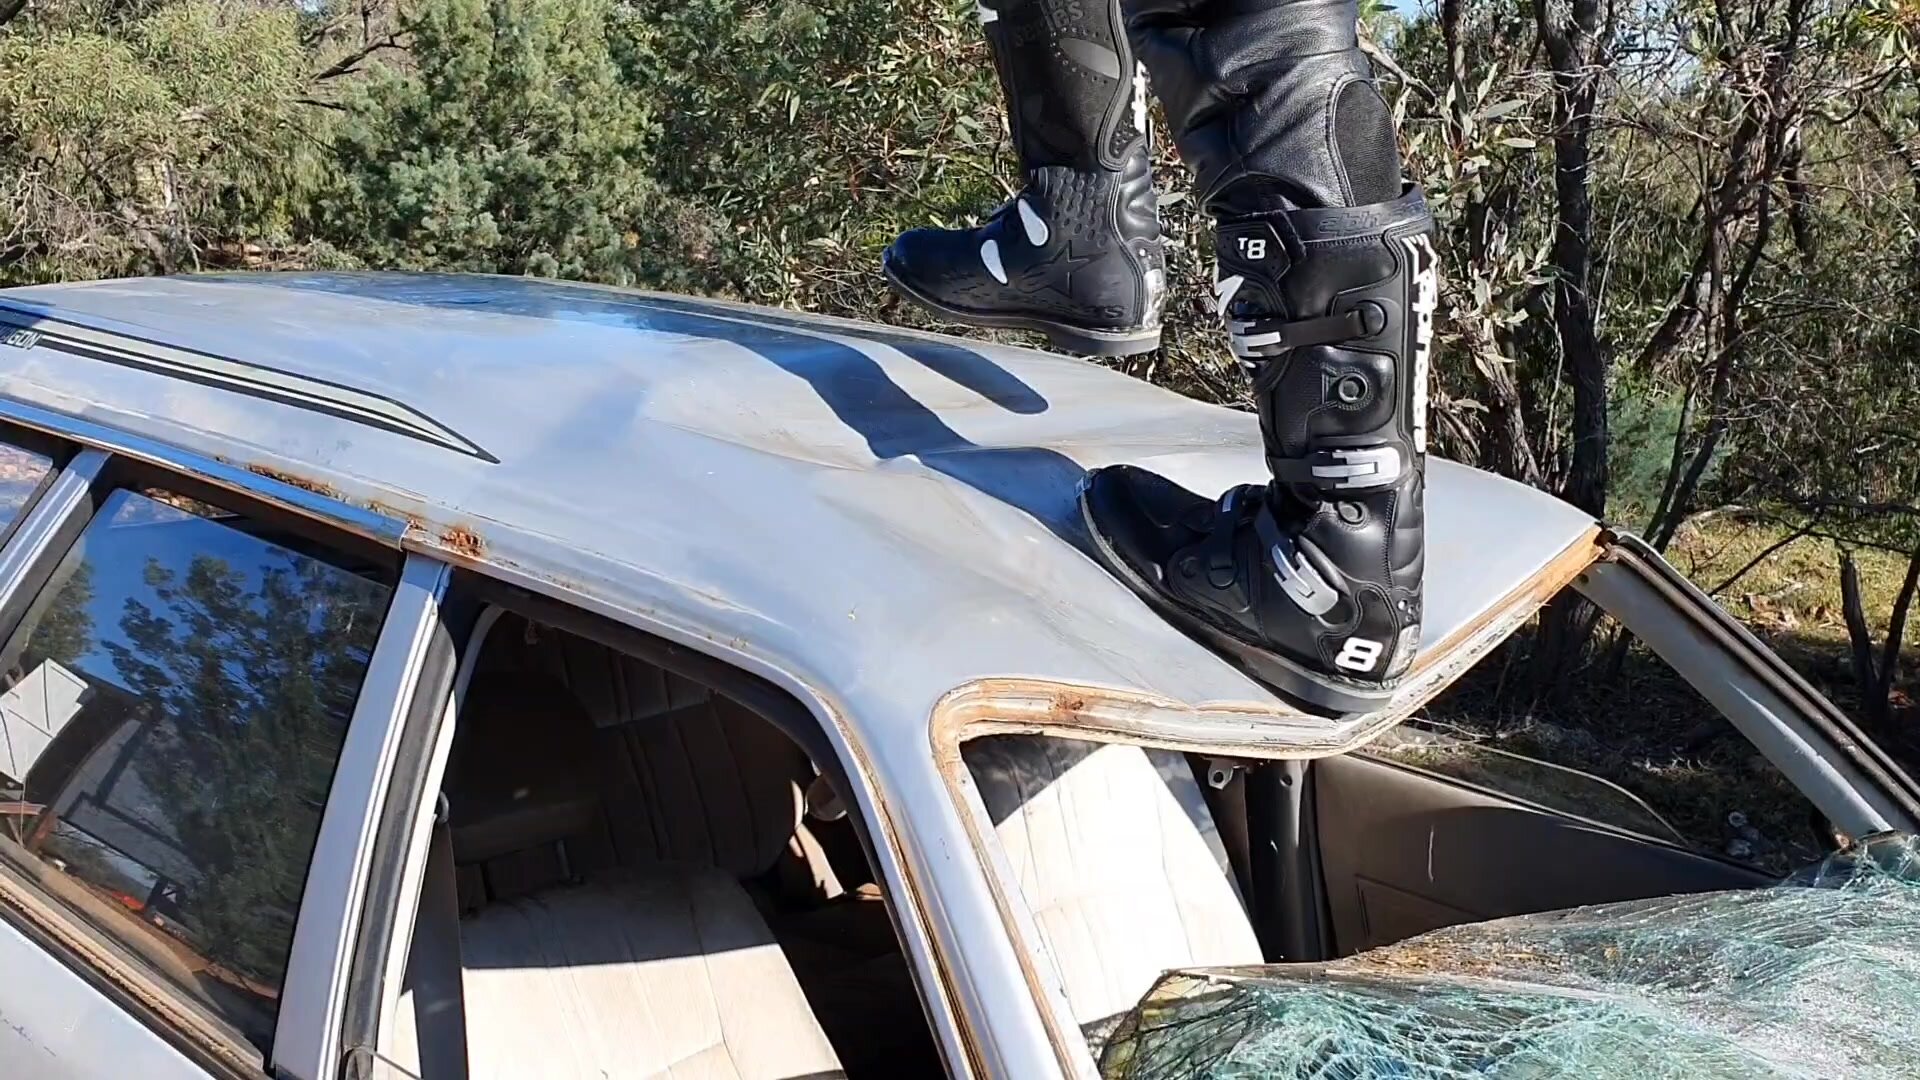 The Shiny Helmeted Stomper stomps on roof of old car